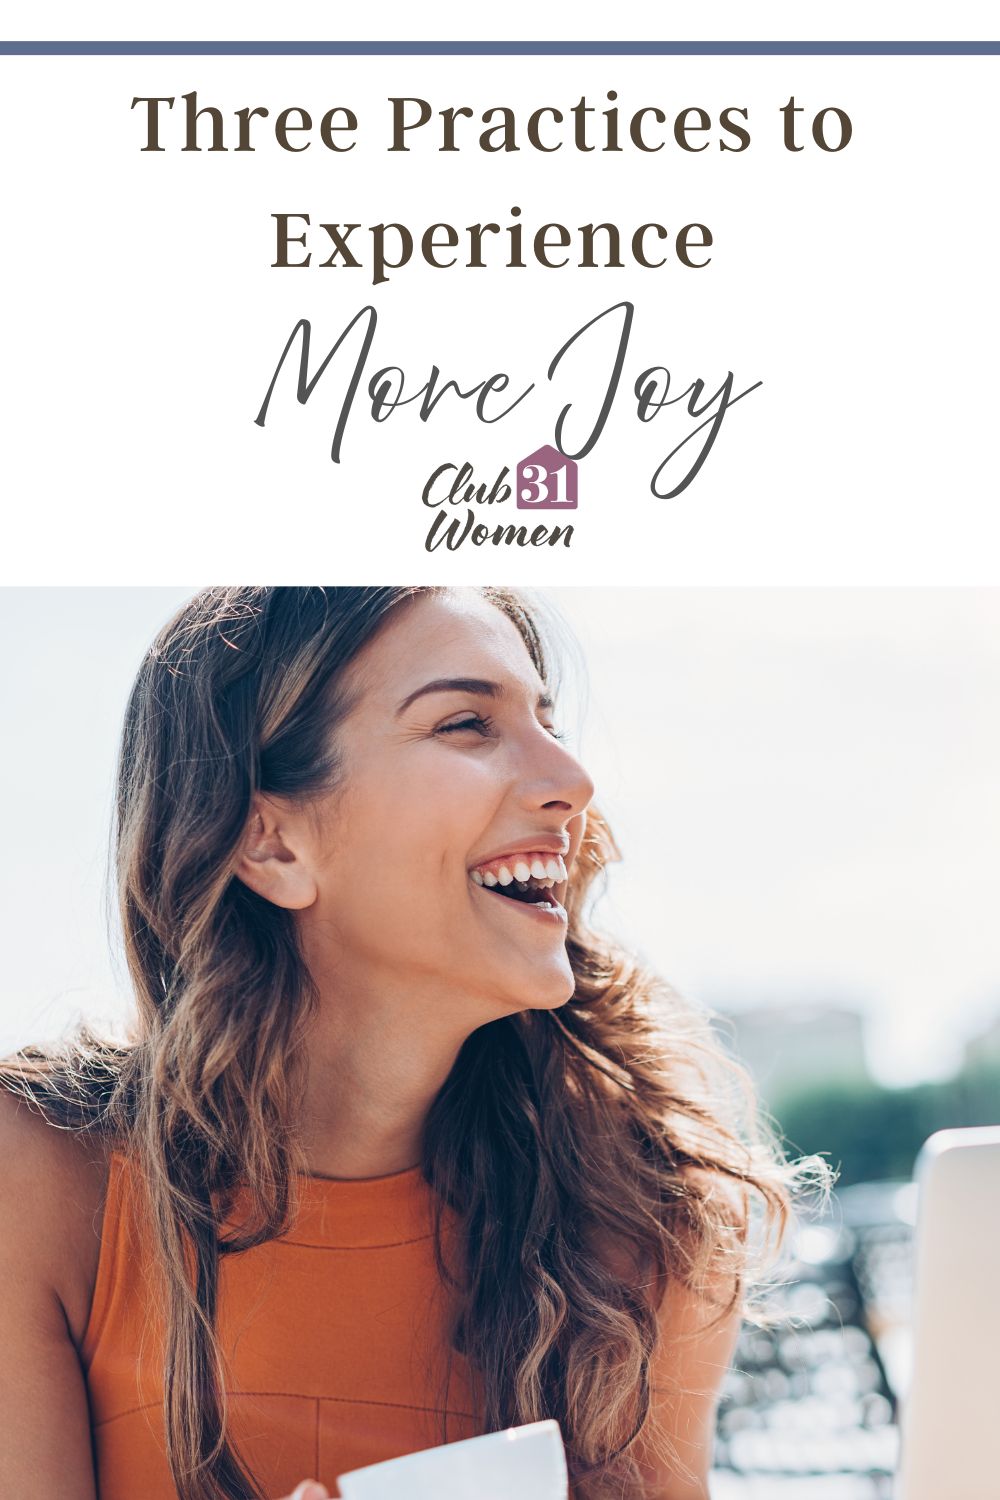 How can you experience more joy in your life? Are you sabotaging your joy? There are three things you can practice right were you are. via @Club31Women